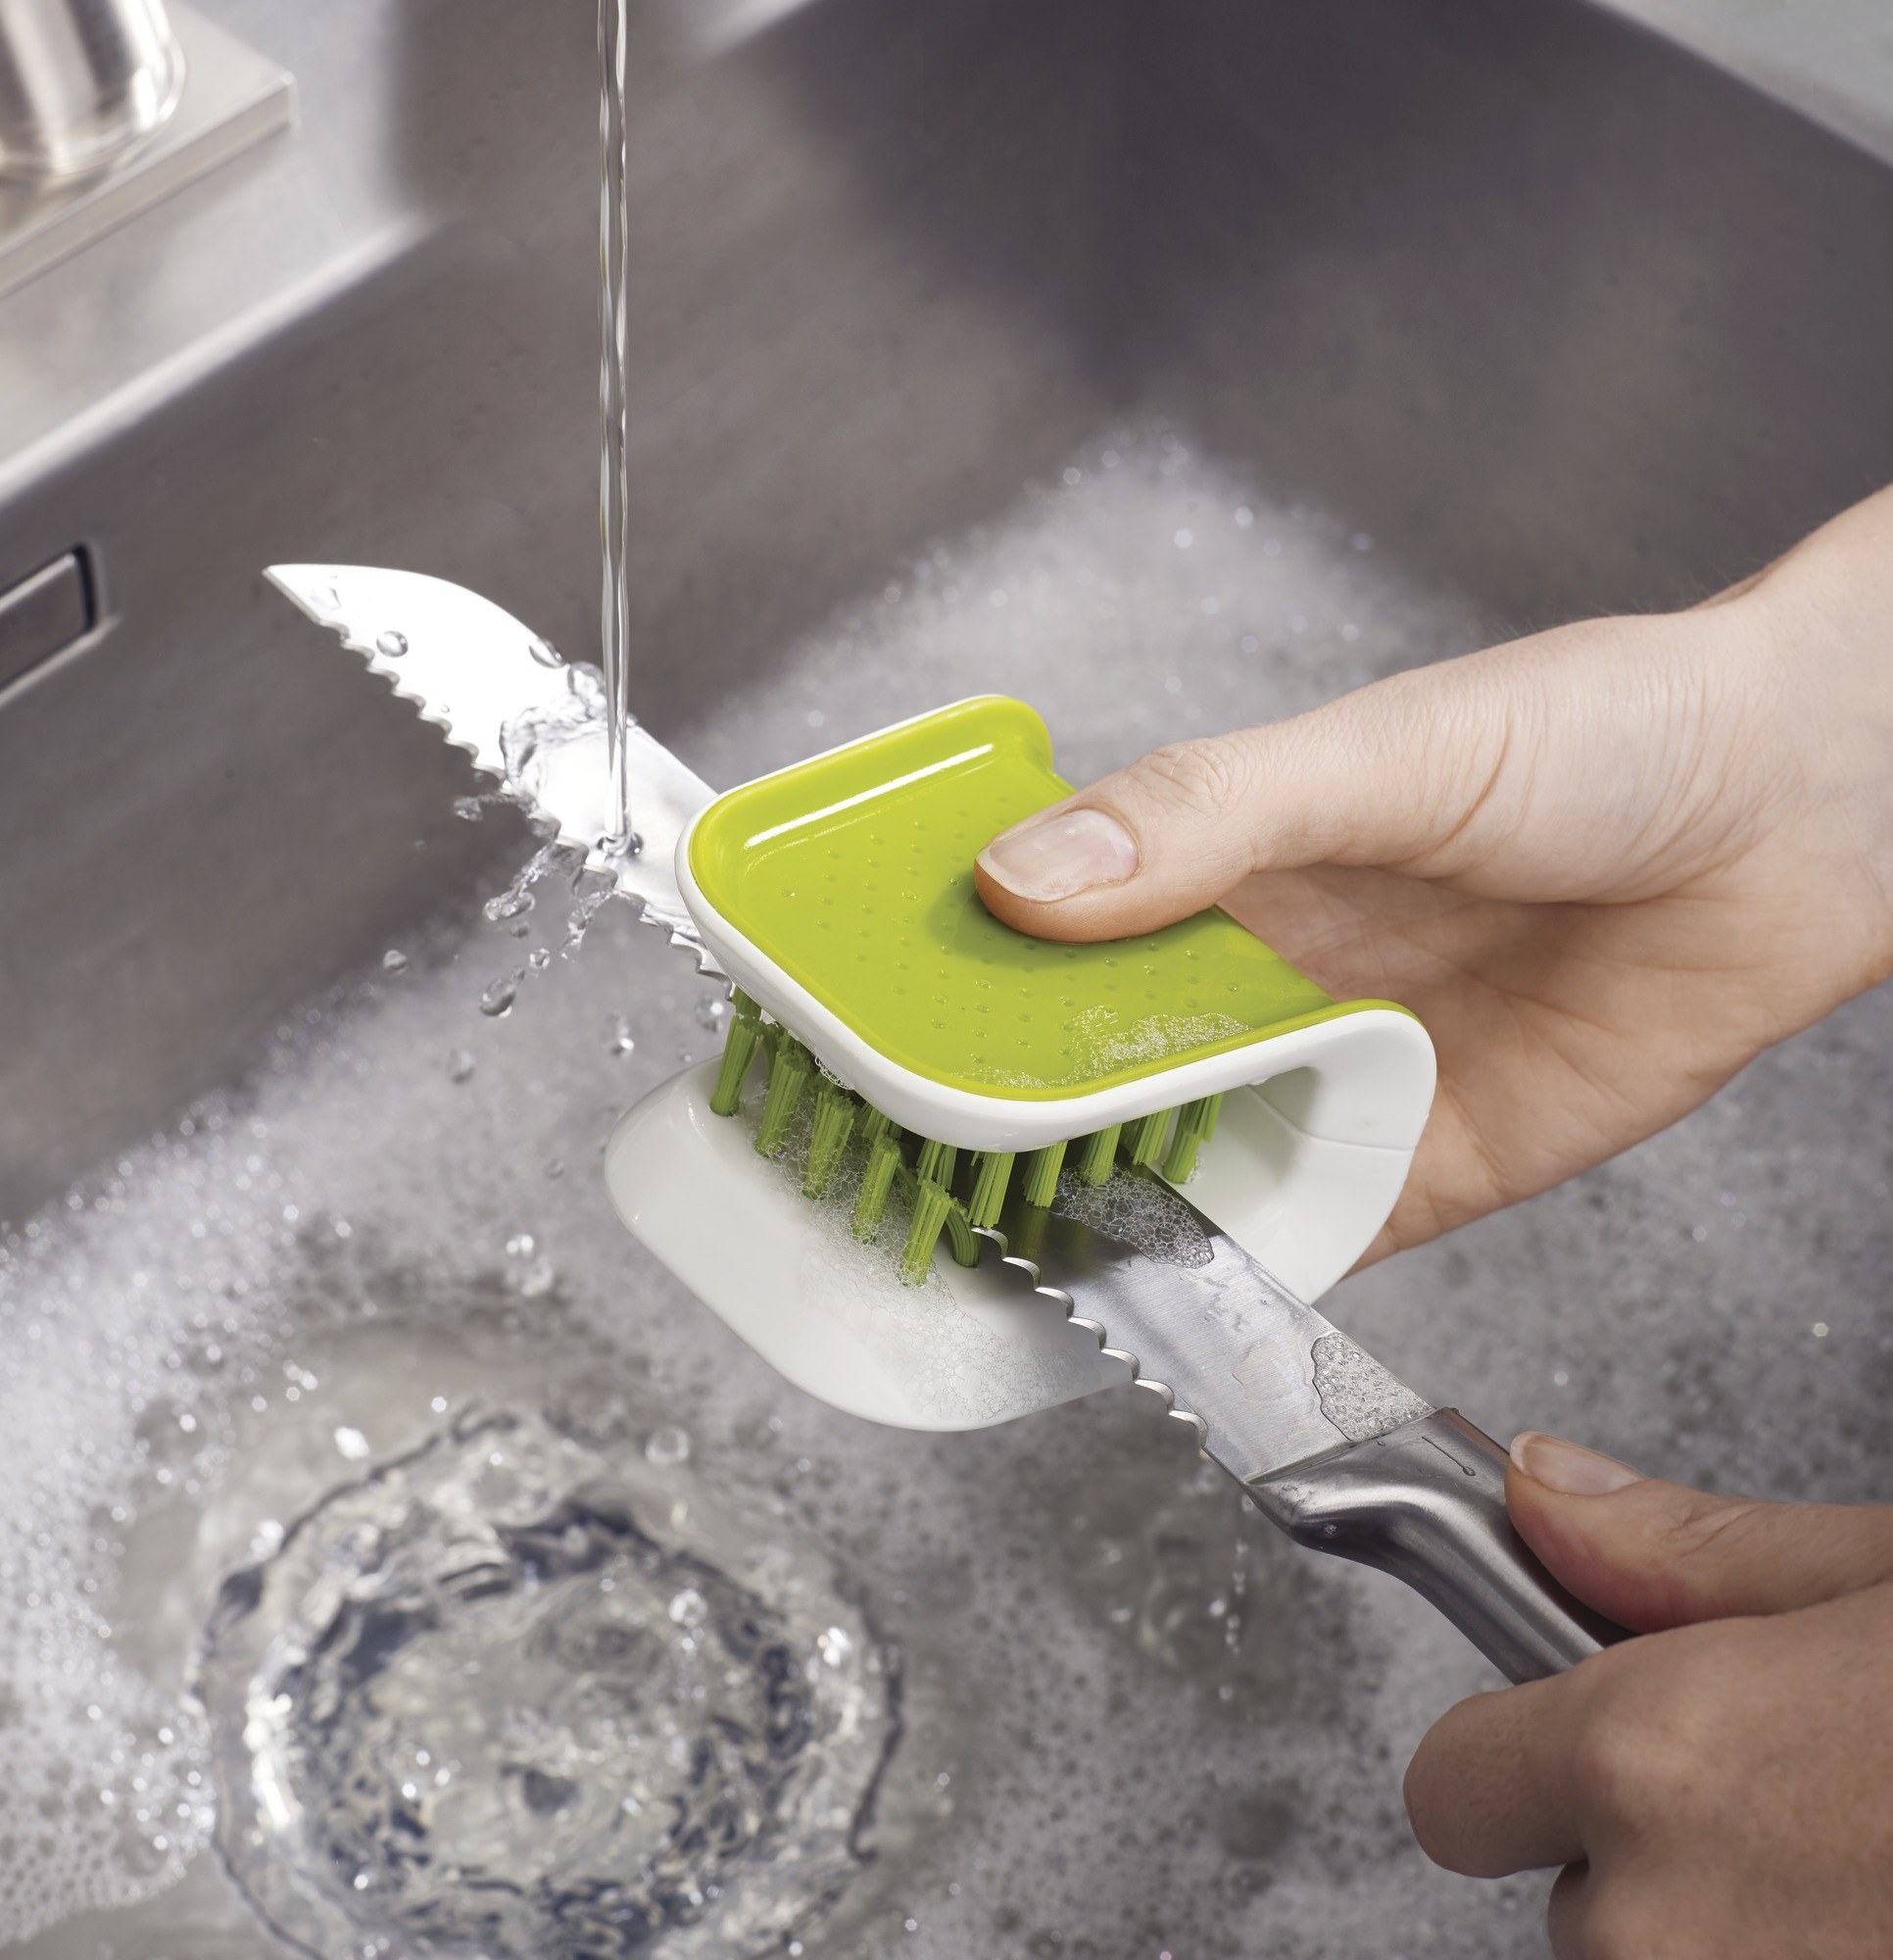 Product photo showing a model using the Joseph Joseph BladeBrush to clean a large kitchen knife